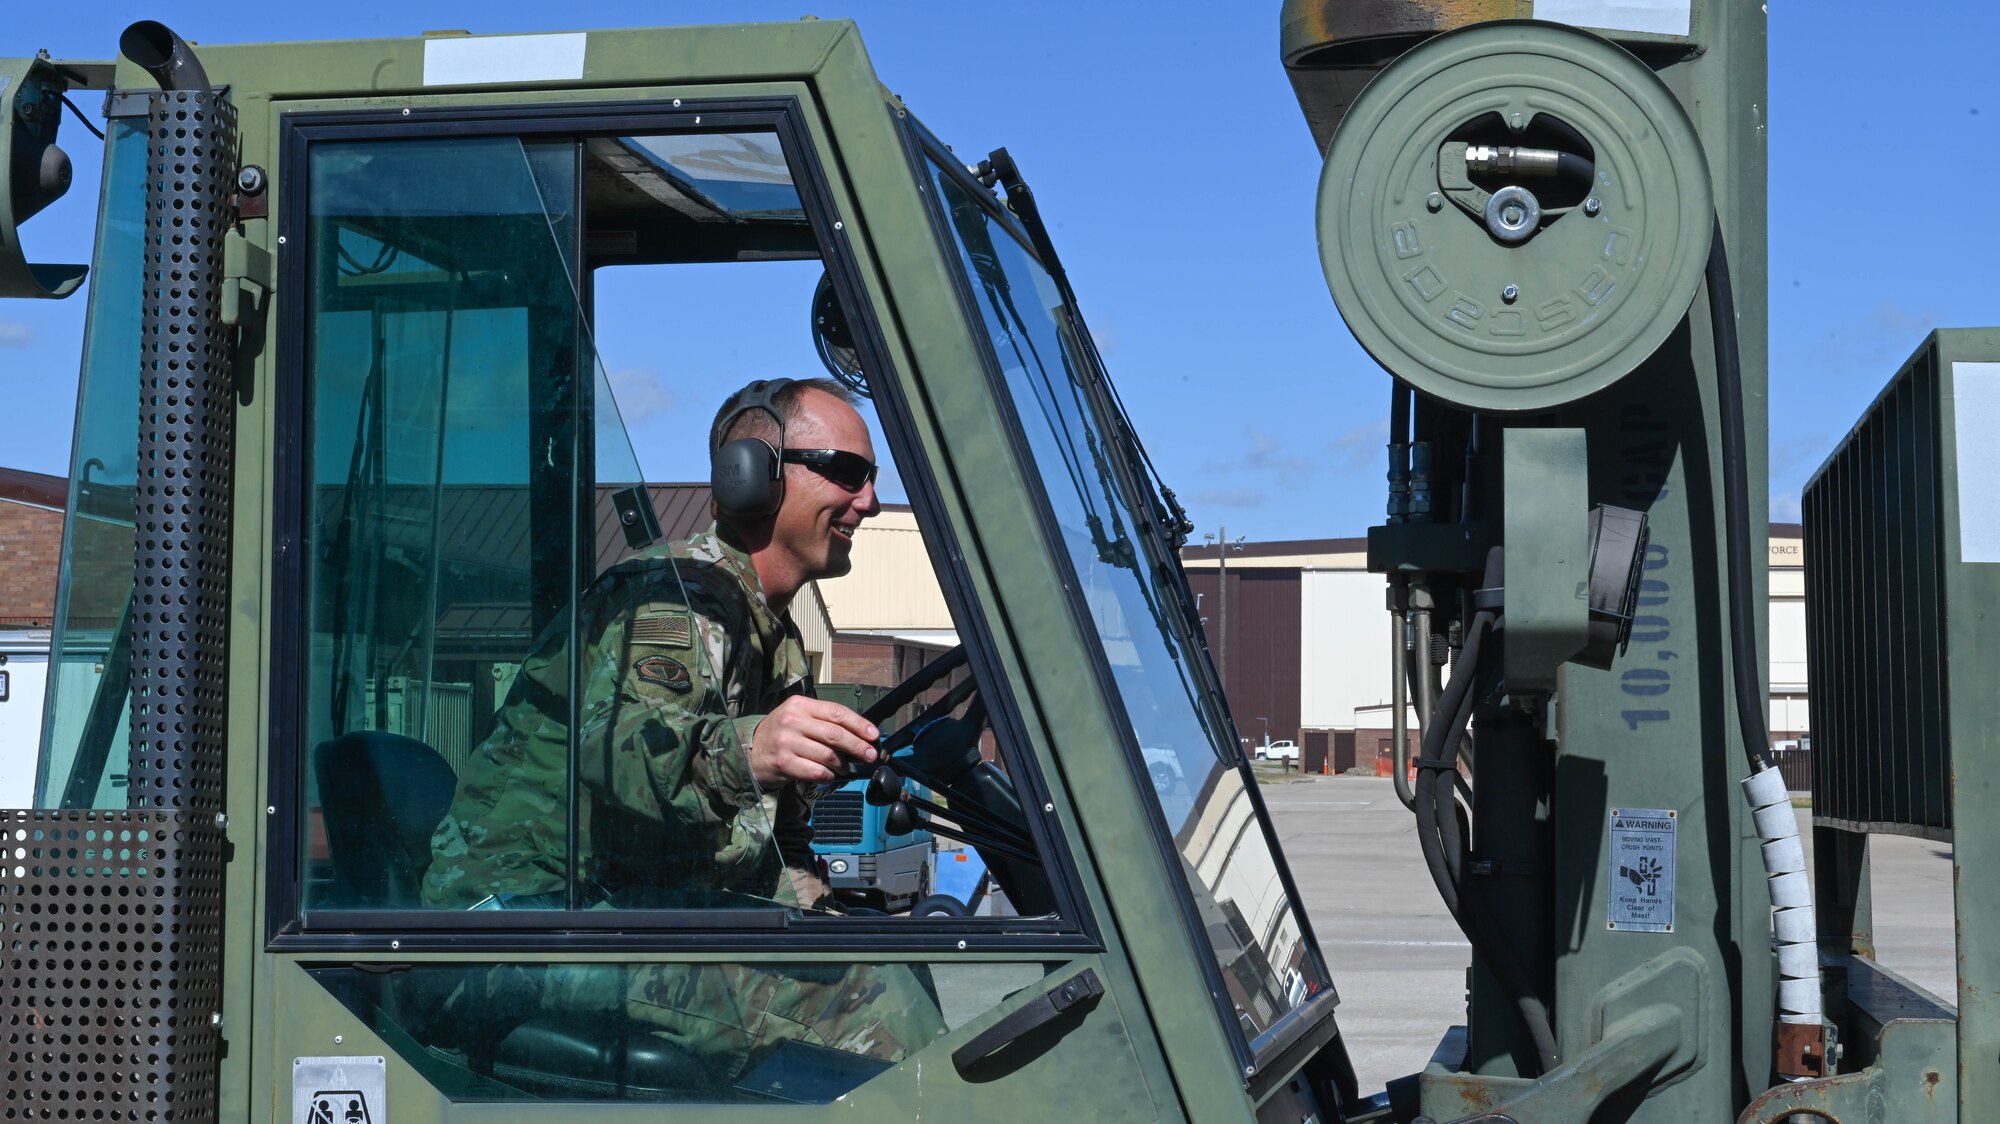 U.S. Air Force Technical Sgt. Kent Sedgwick, 509th Sortie Support section, composite tool kit custodian operates a forklift at Whiteman Air Force Base, Missouri, October 12, 2022. Support is responsible for the serviceability and accountability of about $245 million worth of equipment. (U.S. Air Force photo by Airman 1st Class Hailey Farrell)